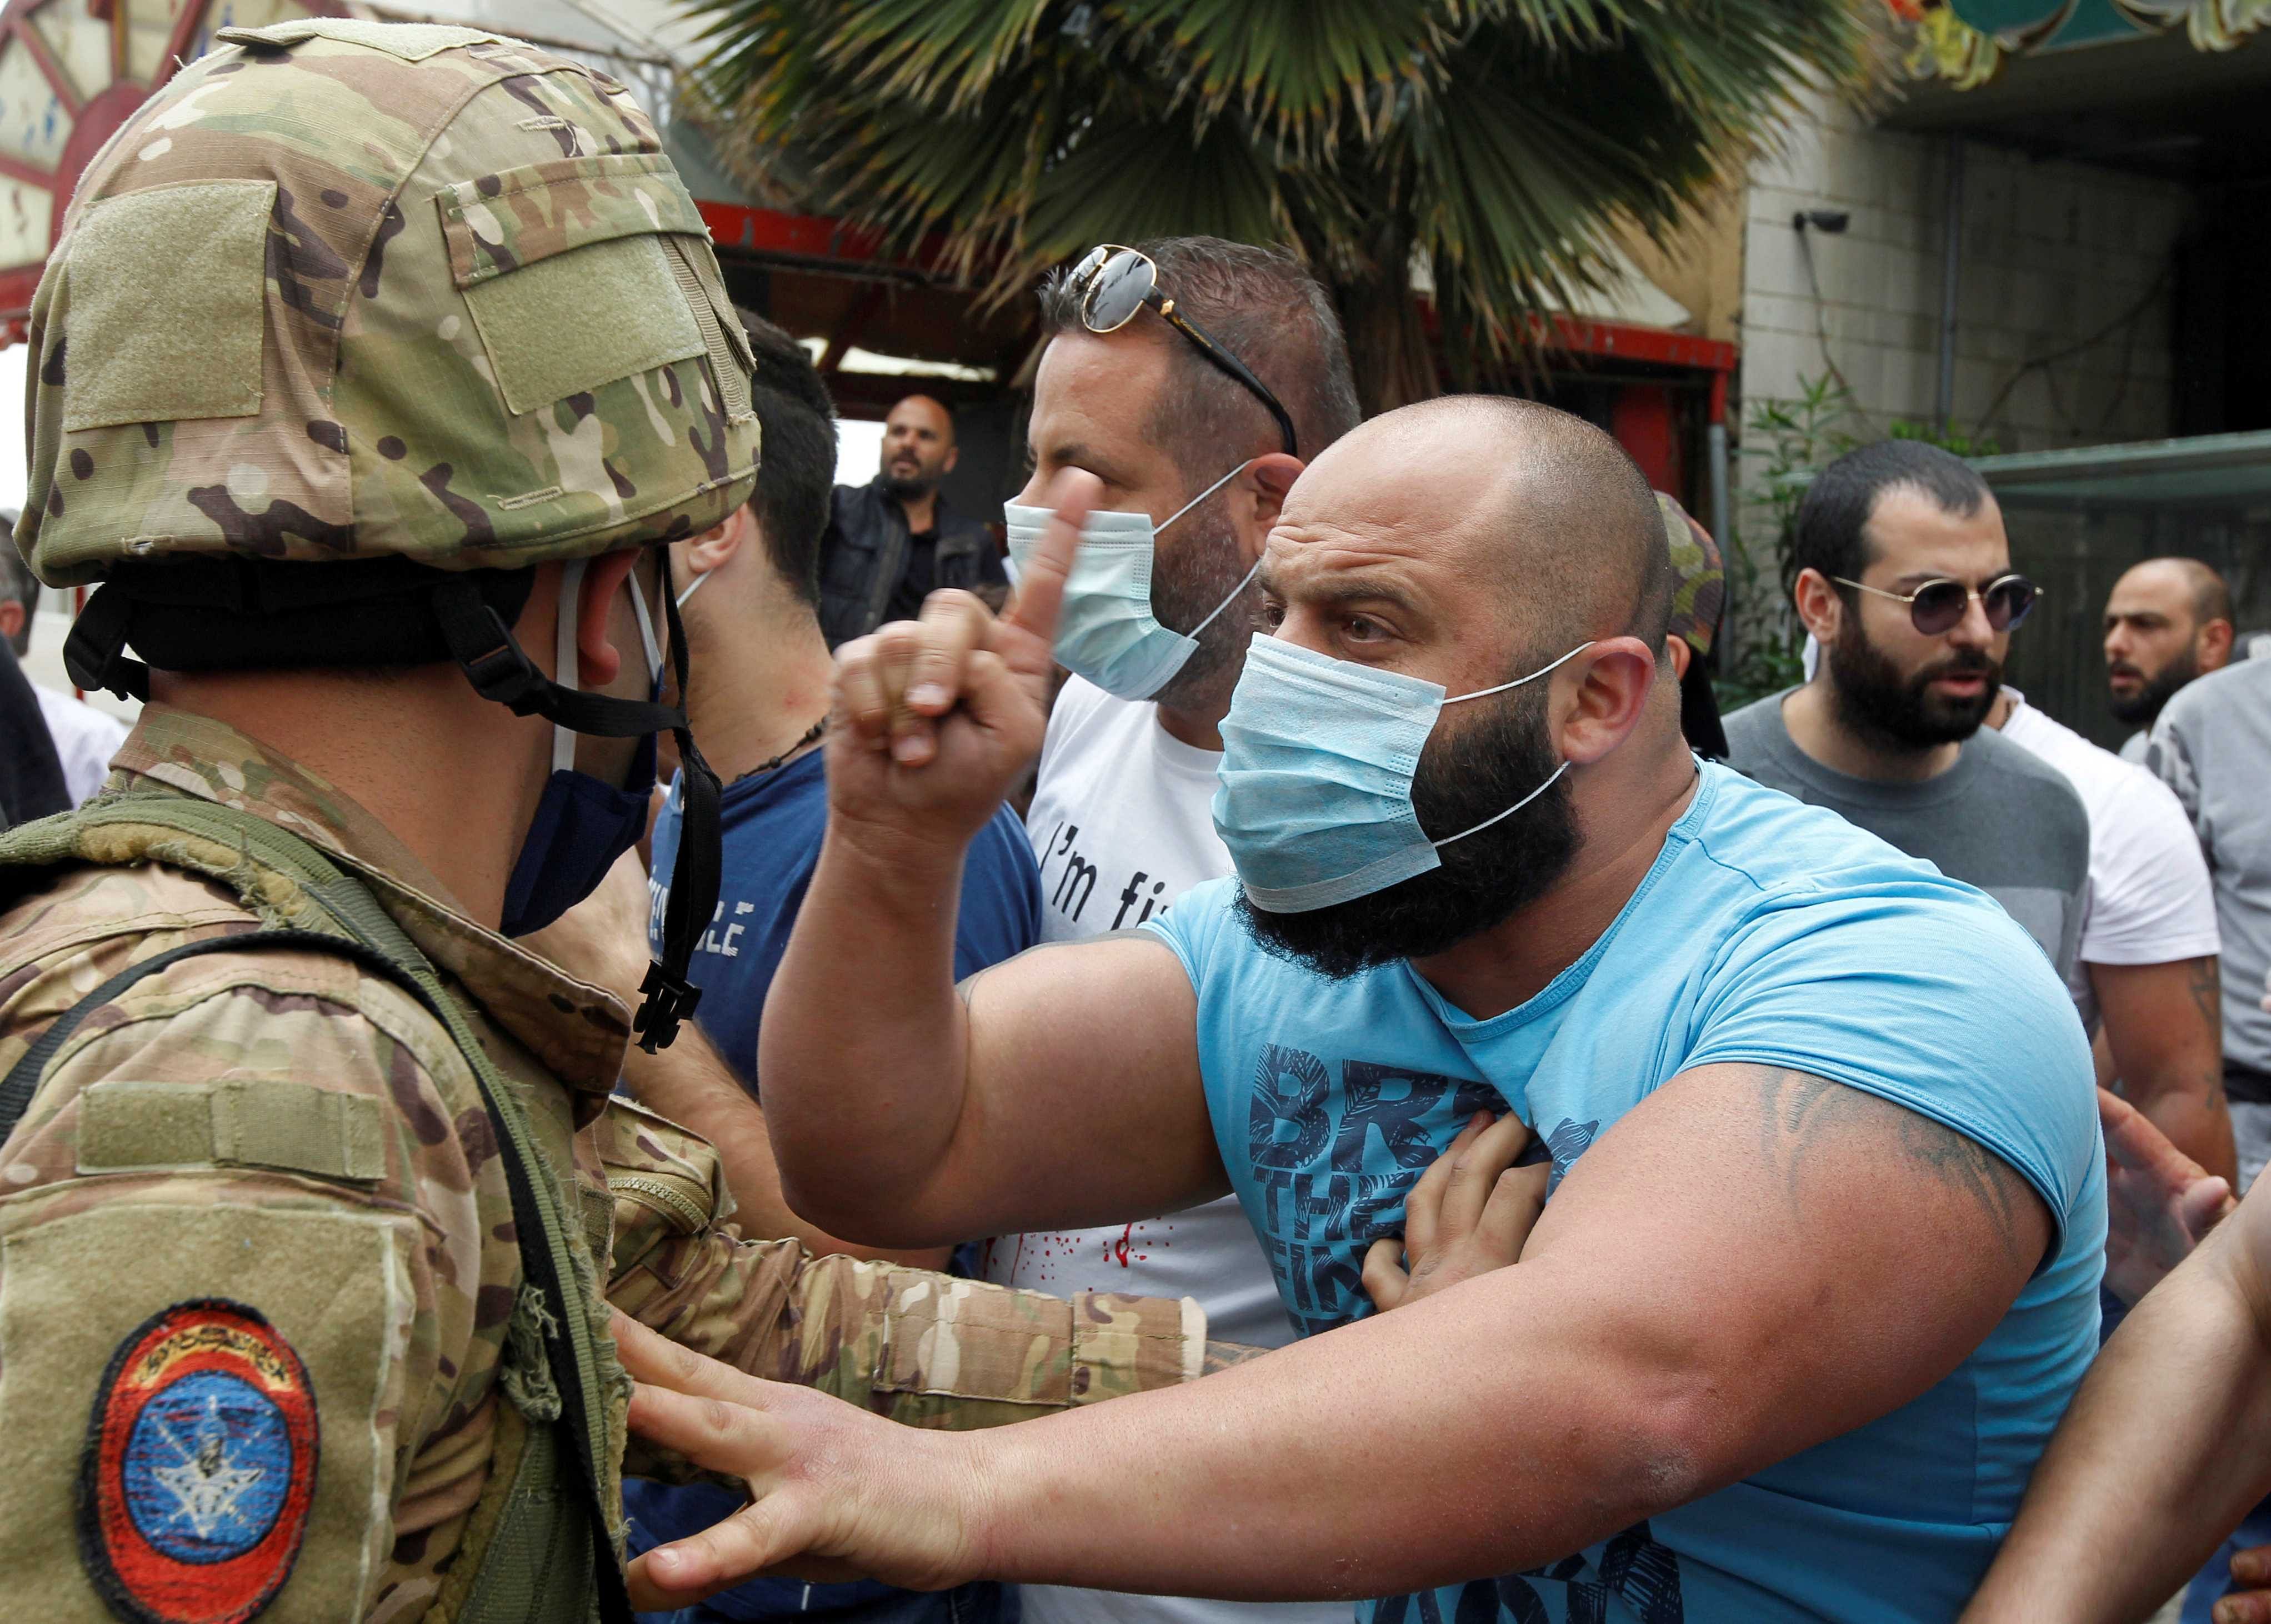 A Lebanese demonstrator gestures to a Lebanese soldier, during a protest against the collapsing Lebanese pound currency and the price hikes, in Zouk, north of Beirut, Lebanon. (Reuters photo)